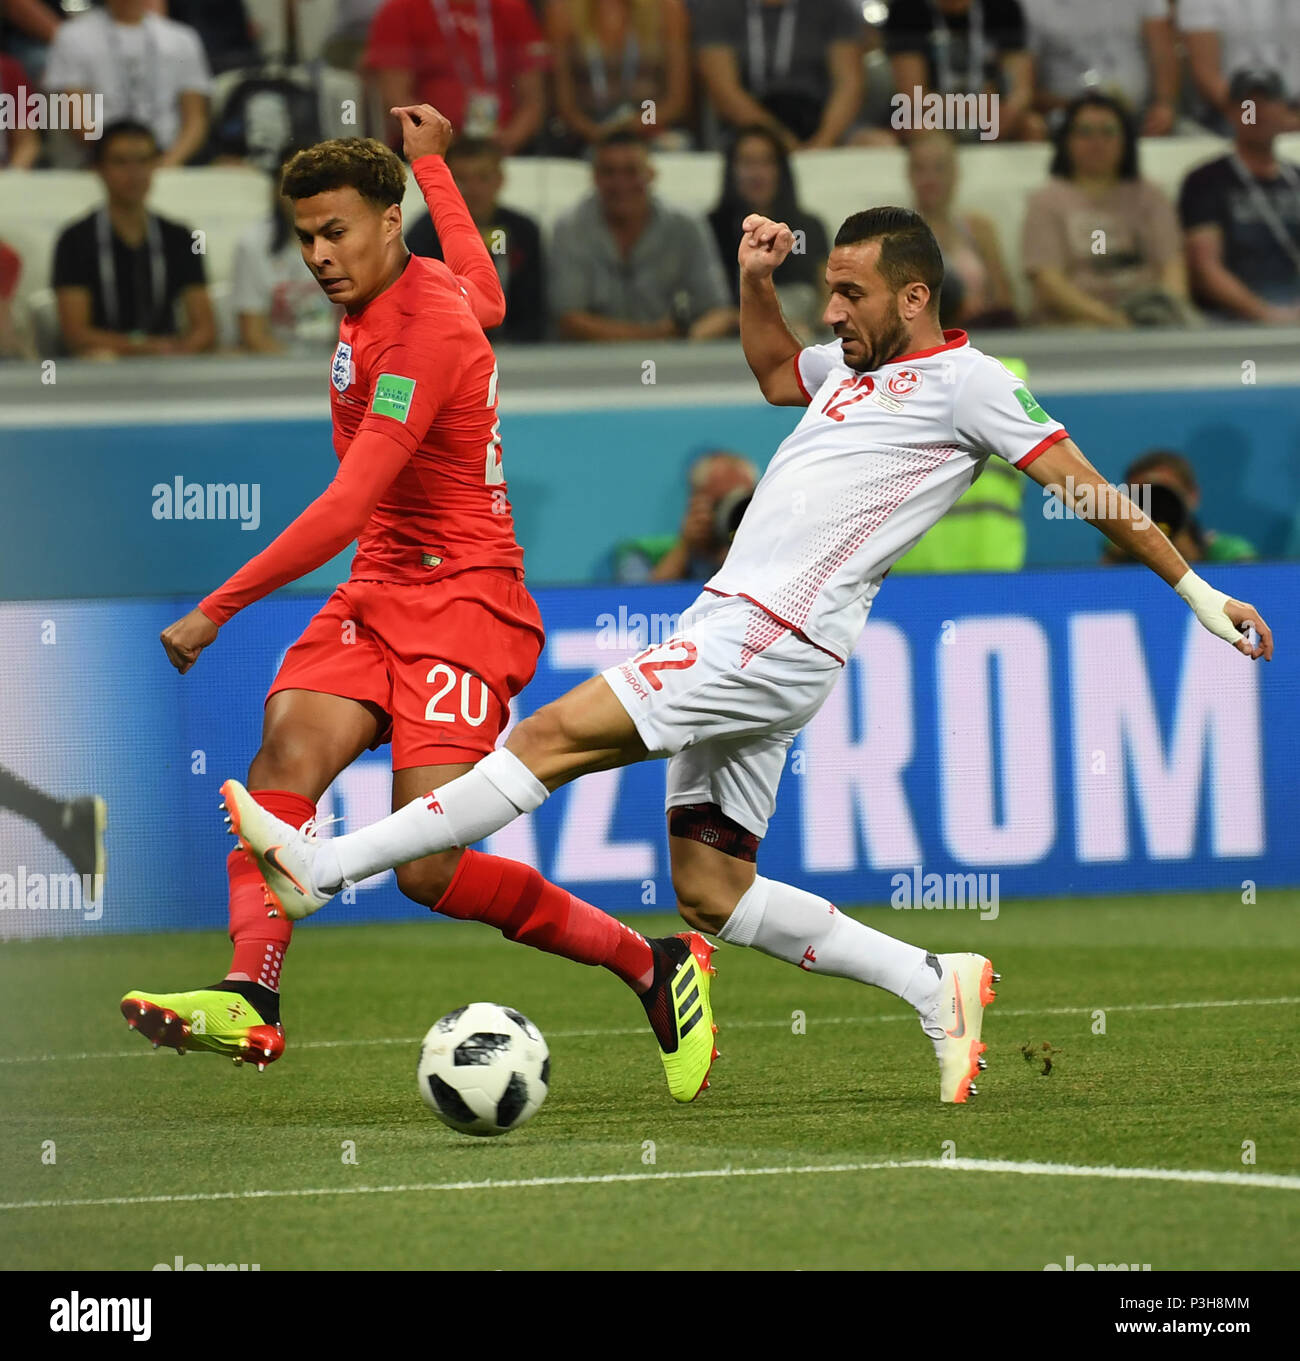 Volgograd, Russia. 18th June, 2018. Dele Alli (L) of England vies with Ali Maaloul of Tunisia during a group G match between Tunisia and England at the 2018 FIFA World Cup in Volgograd, Russia, June 18, 2018. Credit: Chen Cheng/Xinhua/Alamy Live News Stock Photo